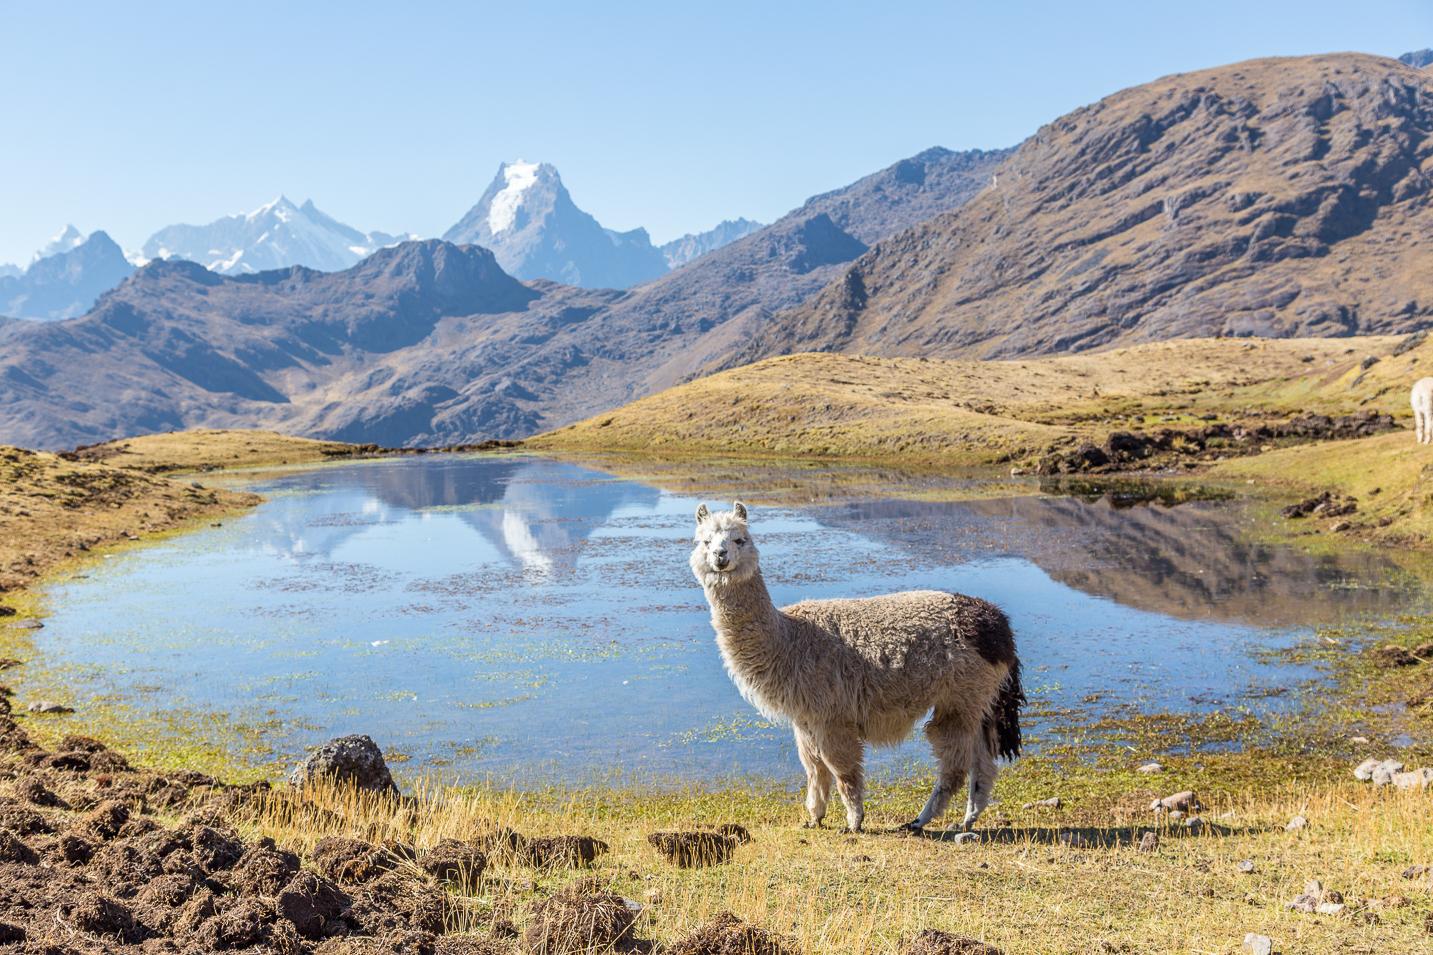 Alpacas in the Peruvian Andes where the couple trekked